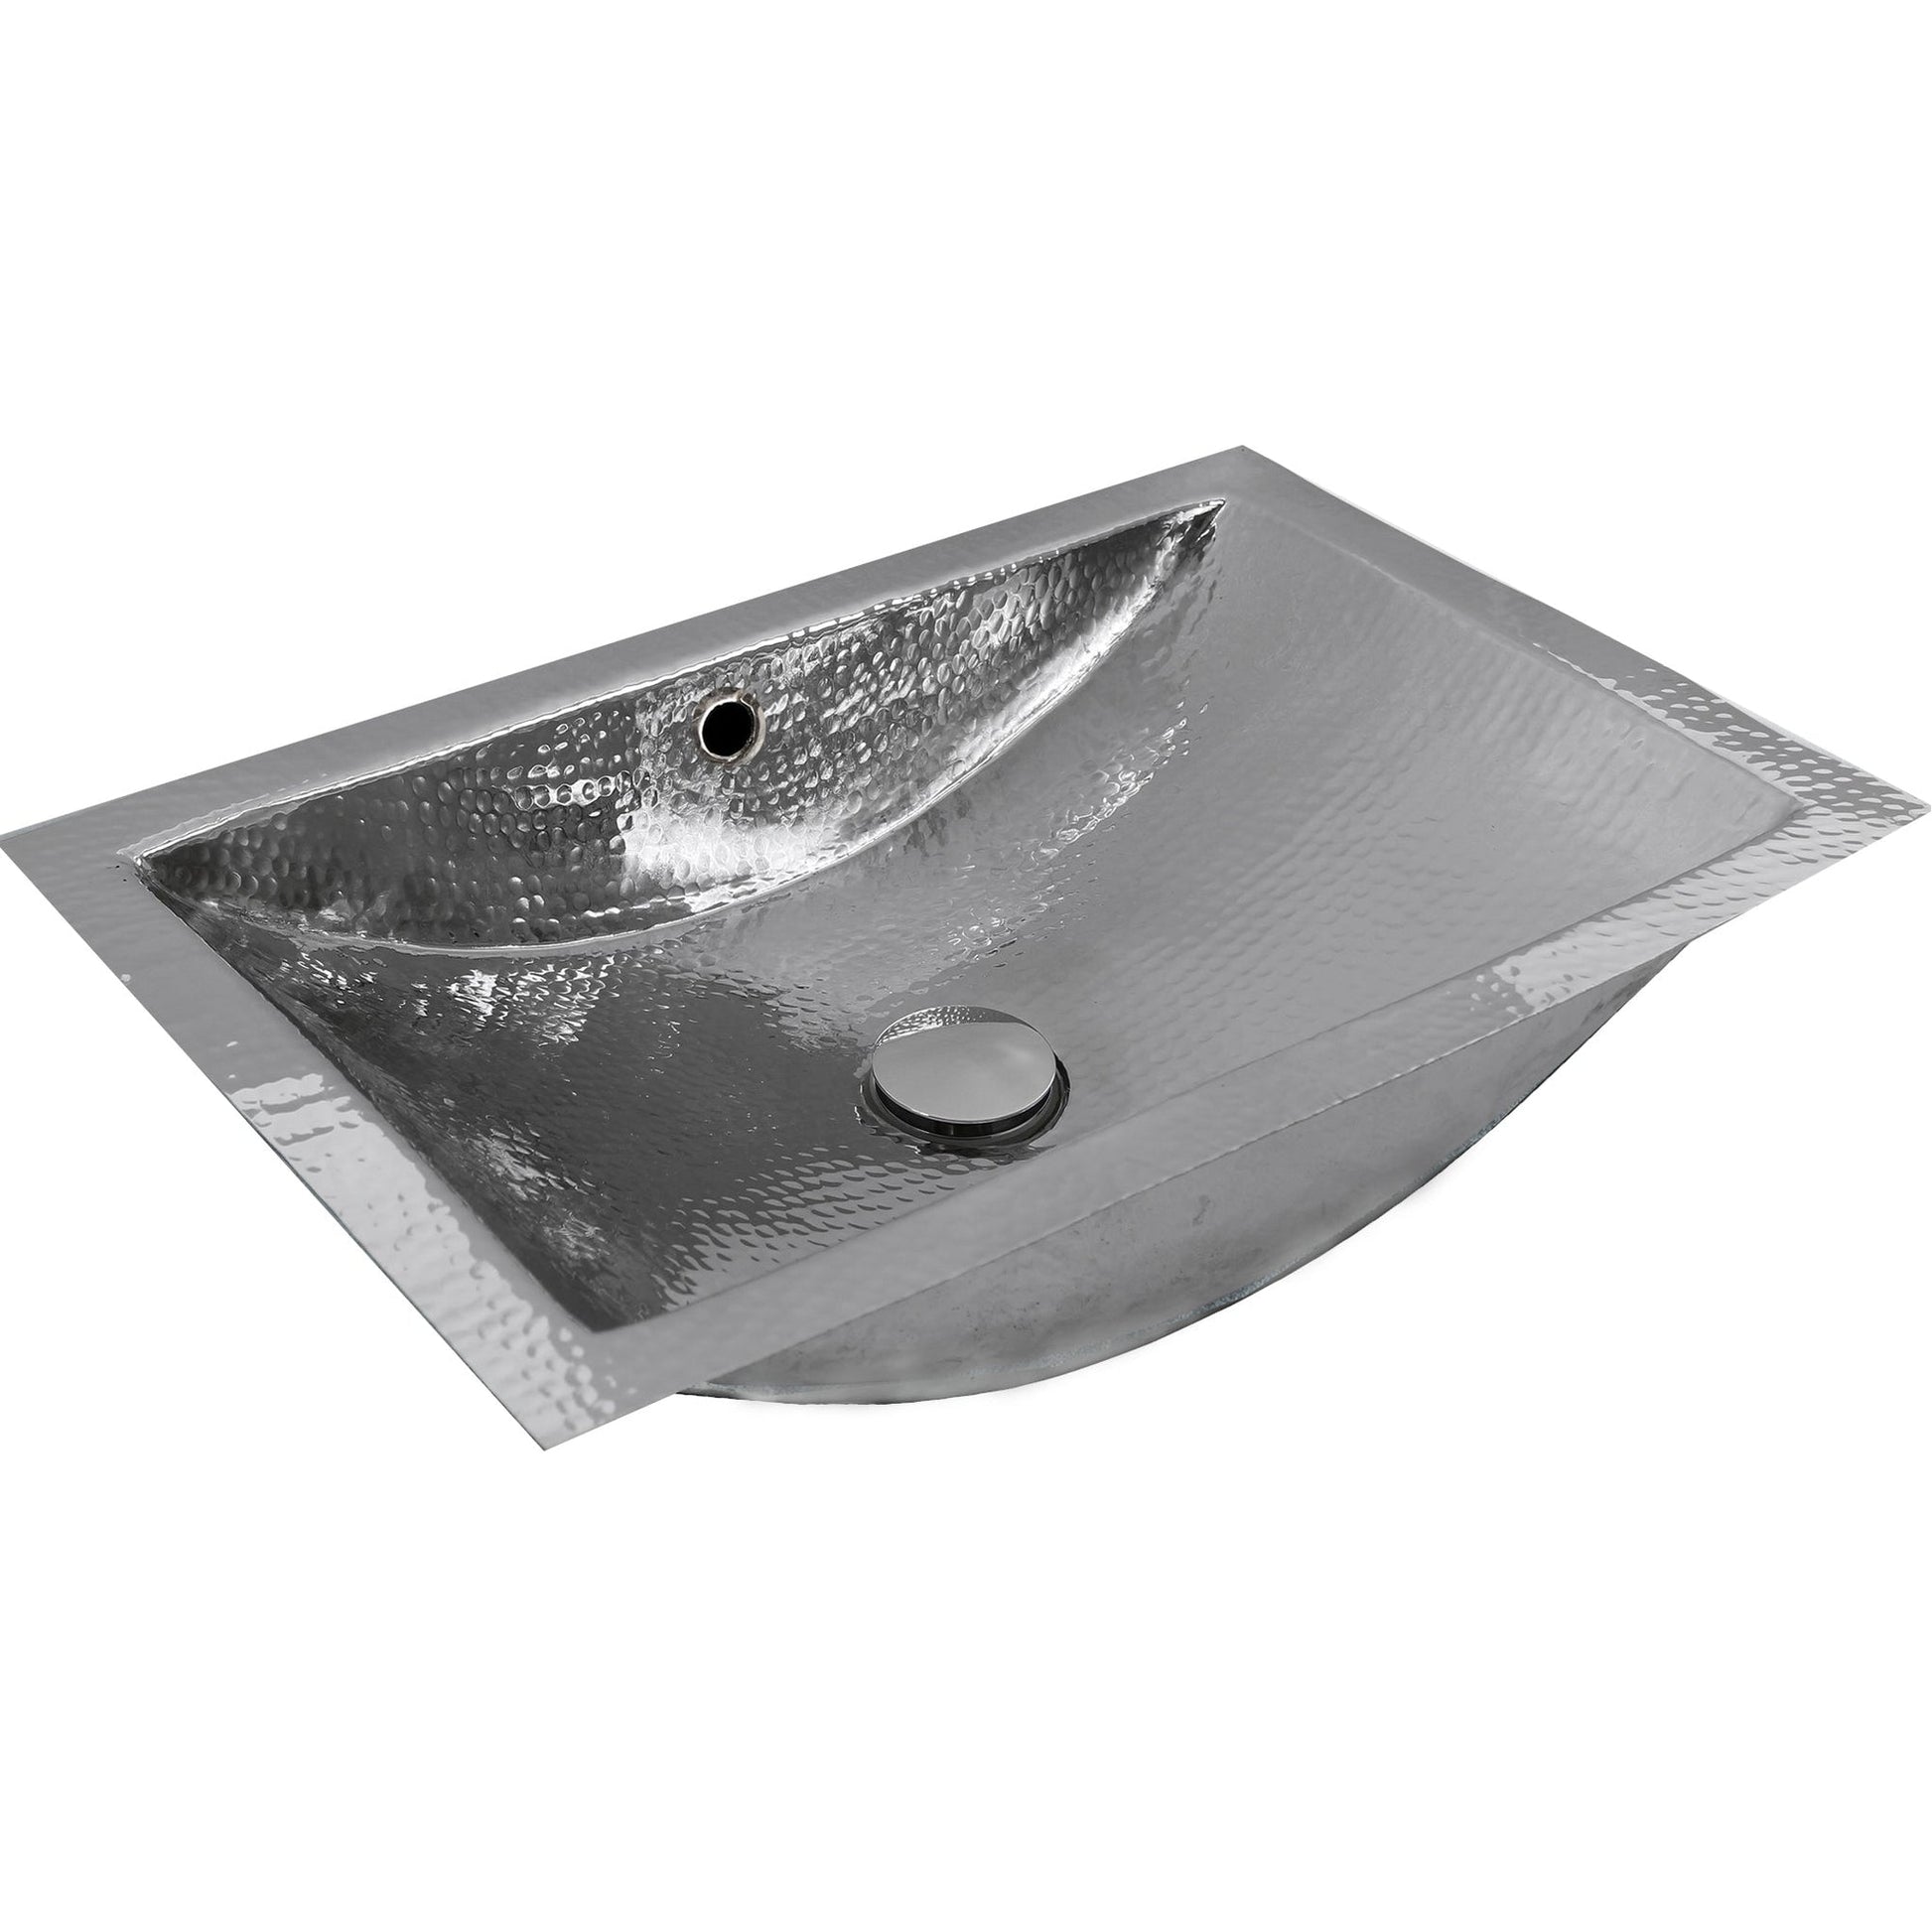 Nantucket Sinks Brightwork Home 21" W x 14" D" Rectangular Hand Hammered Polished Stainless Steel Undermount Sink With Overflow